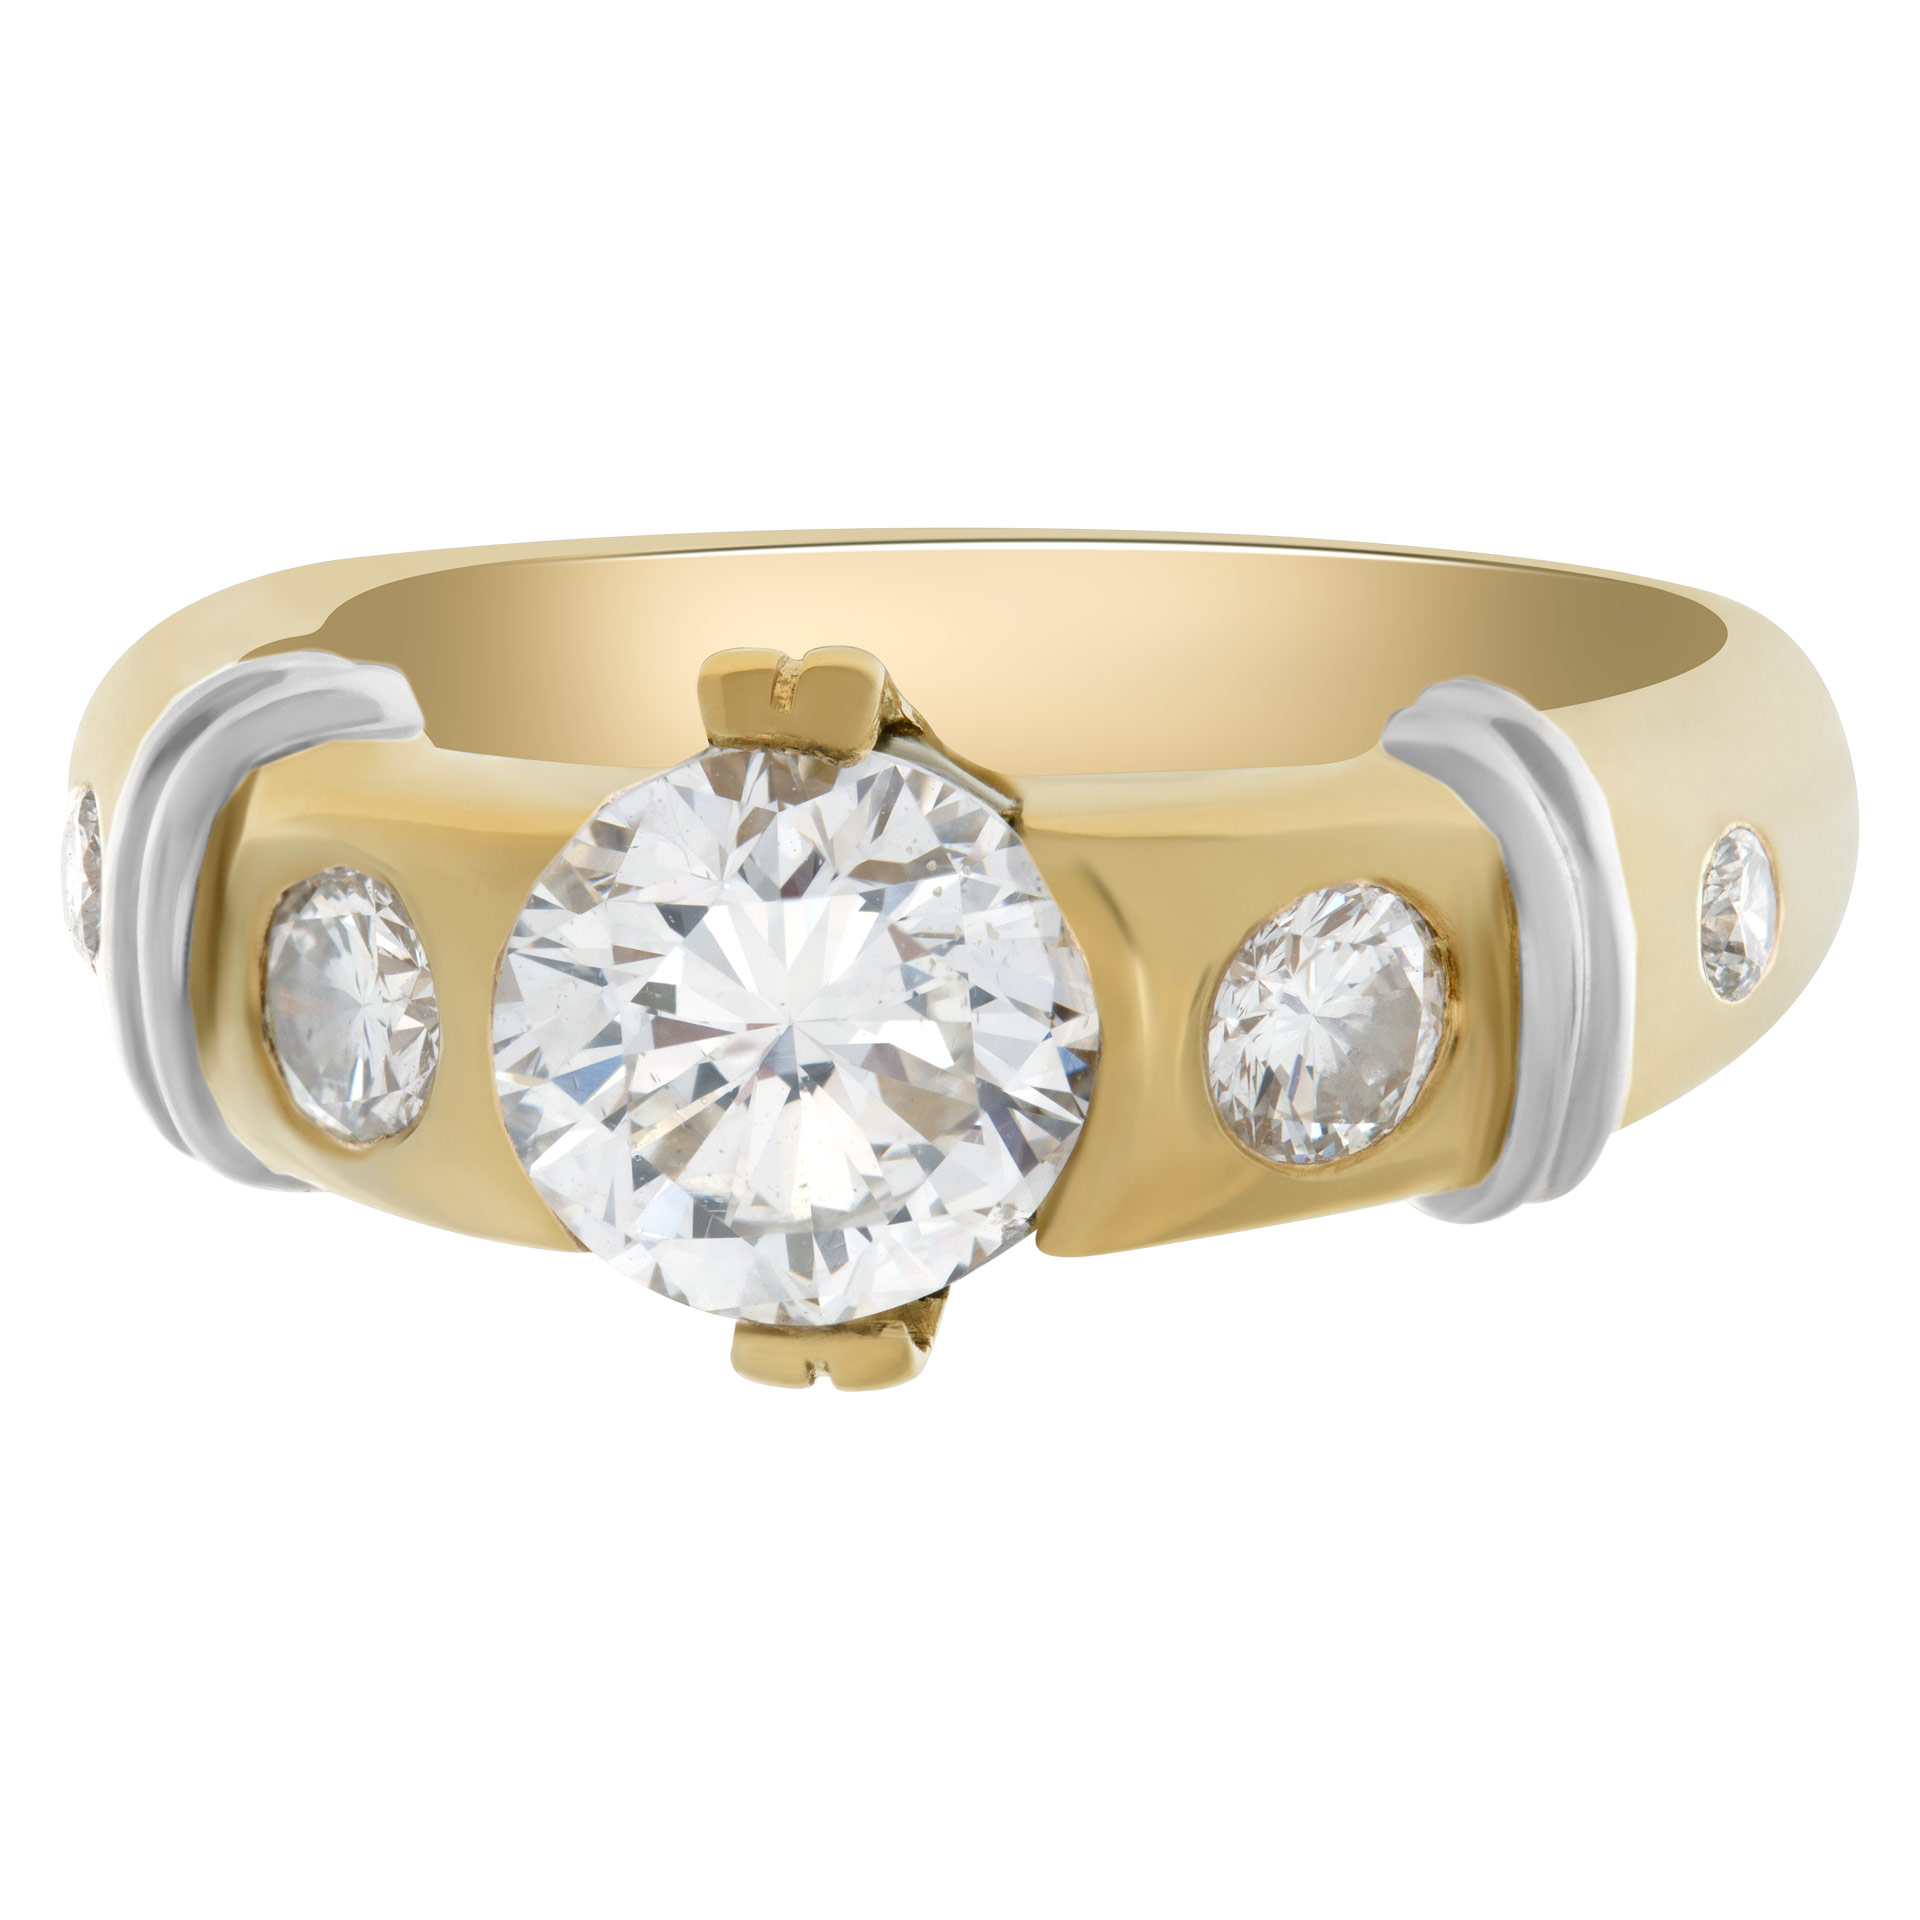 GIA certified engagement diamond ring and wedding band  1.51 ct (G color, SI2 clarity) in 18k yellow gold